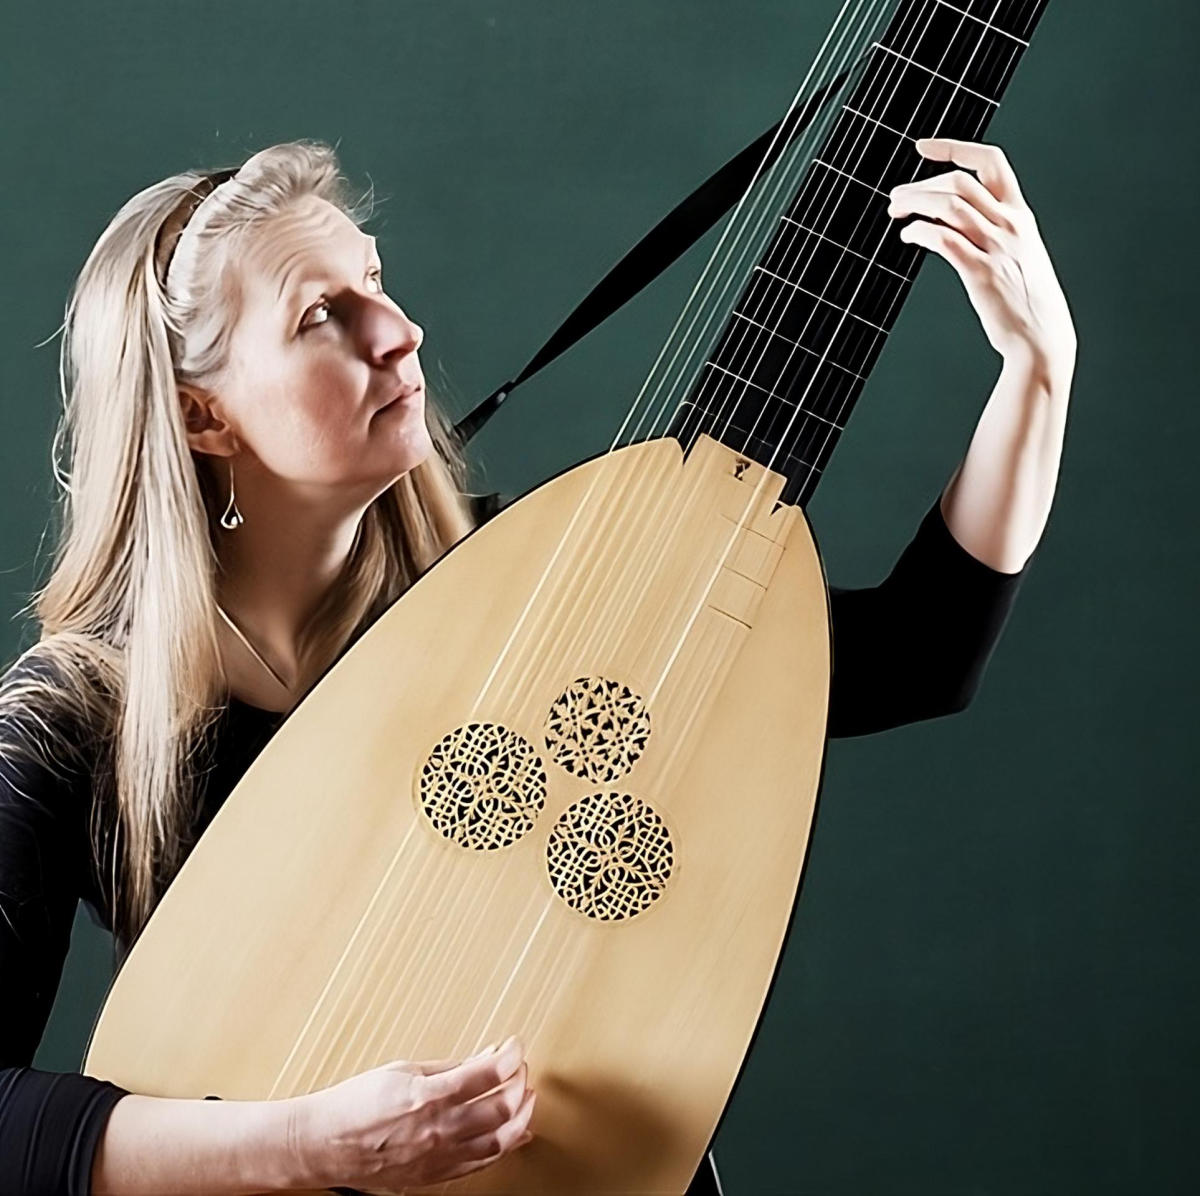 In conversation: Lynda Sayce - Continuo Connect meets leading lutenist and theorbo champion, Lynda Sayce